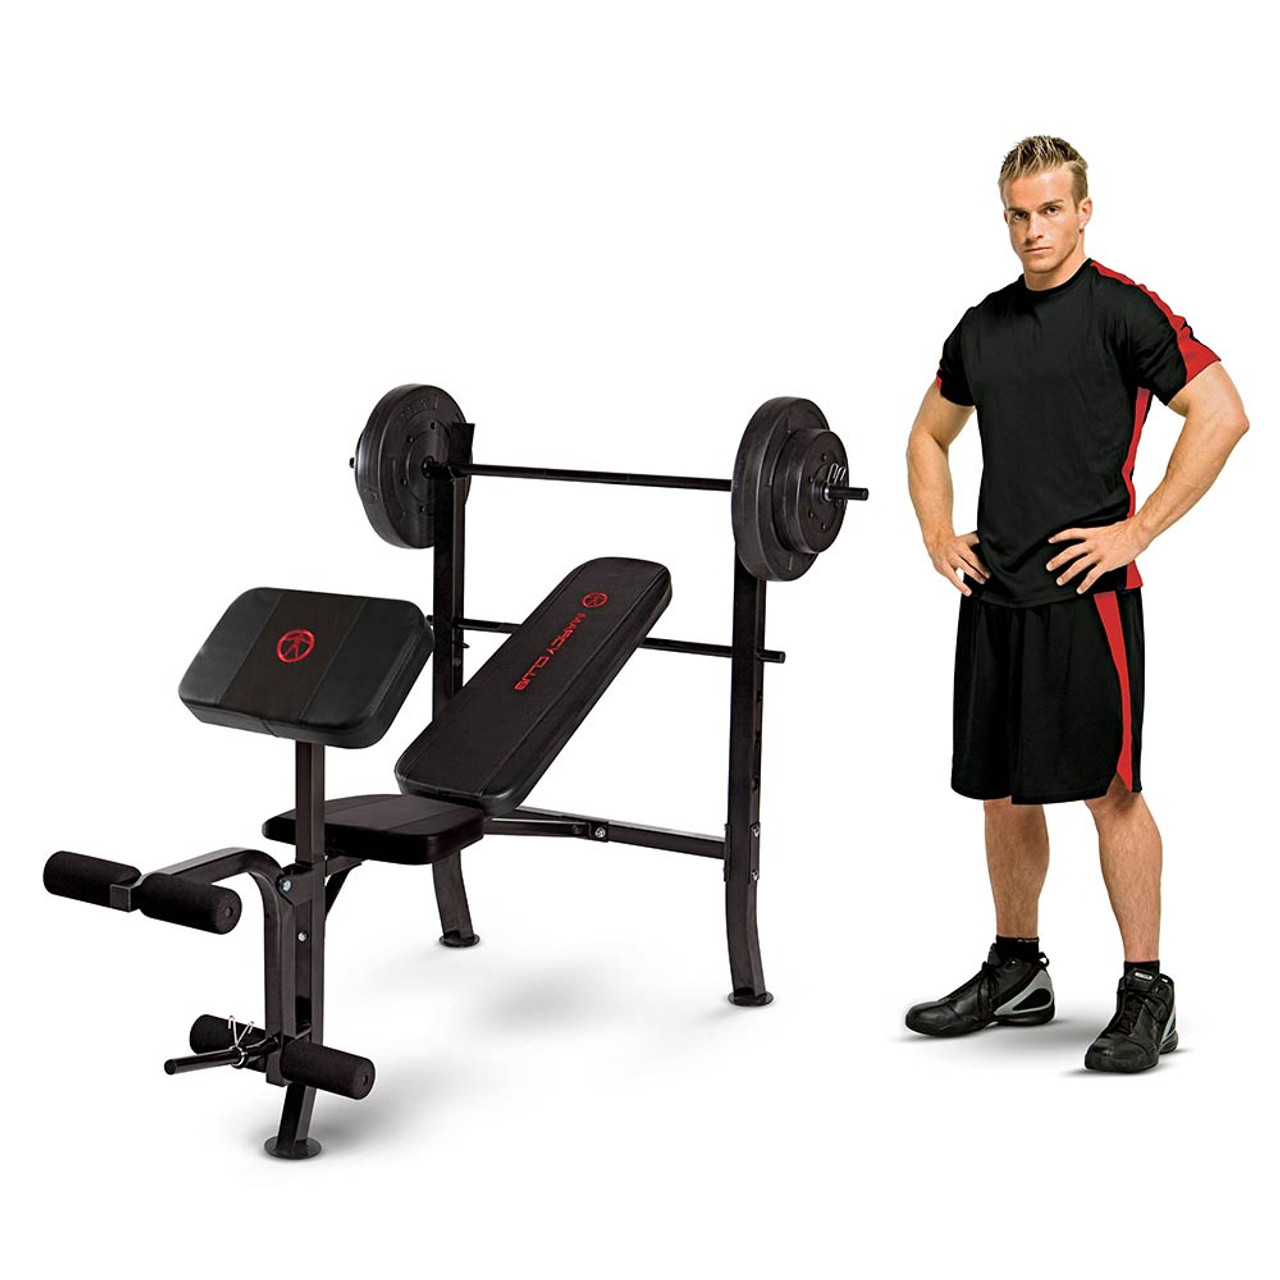 The Standard Weight Bench Marcy MKB-2081 includes weight for your convenience